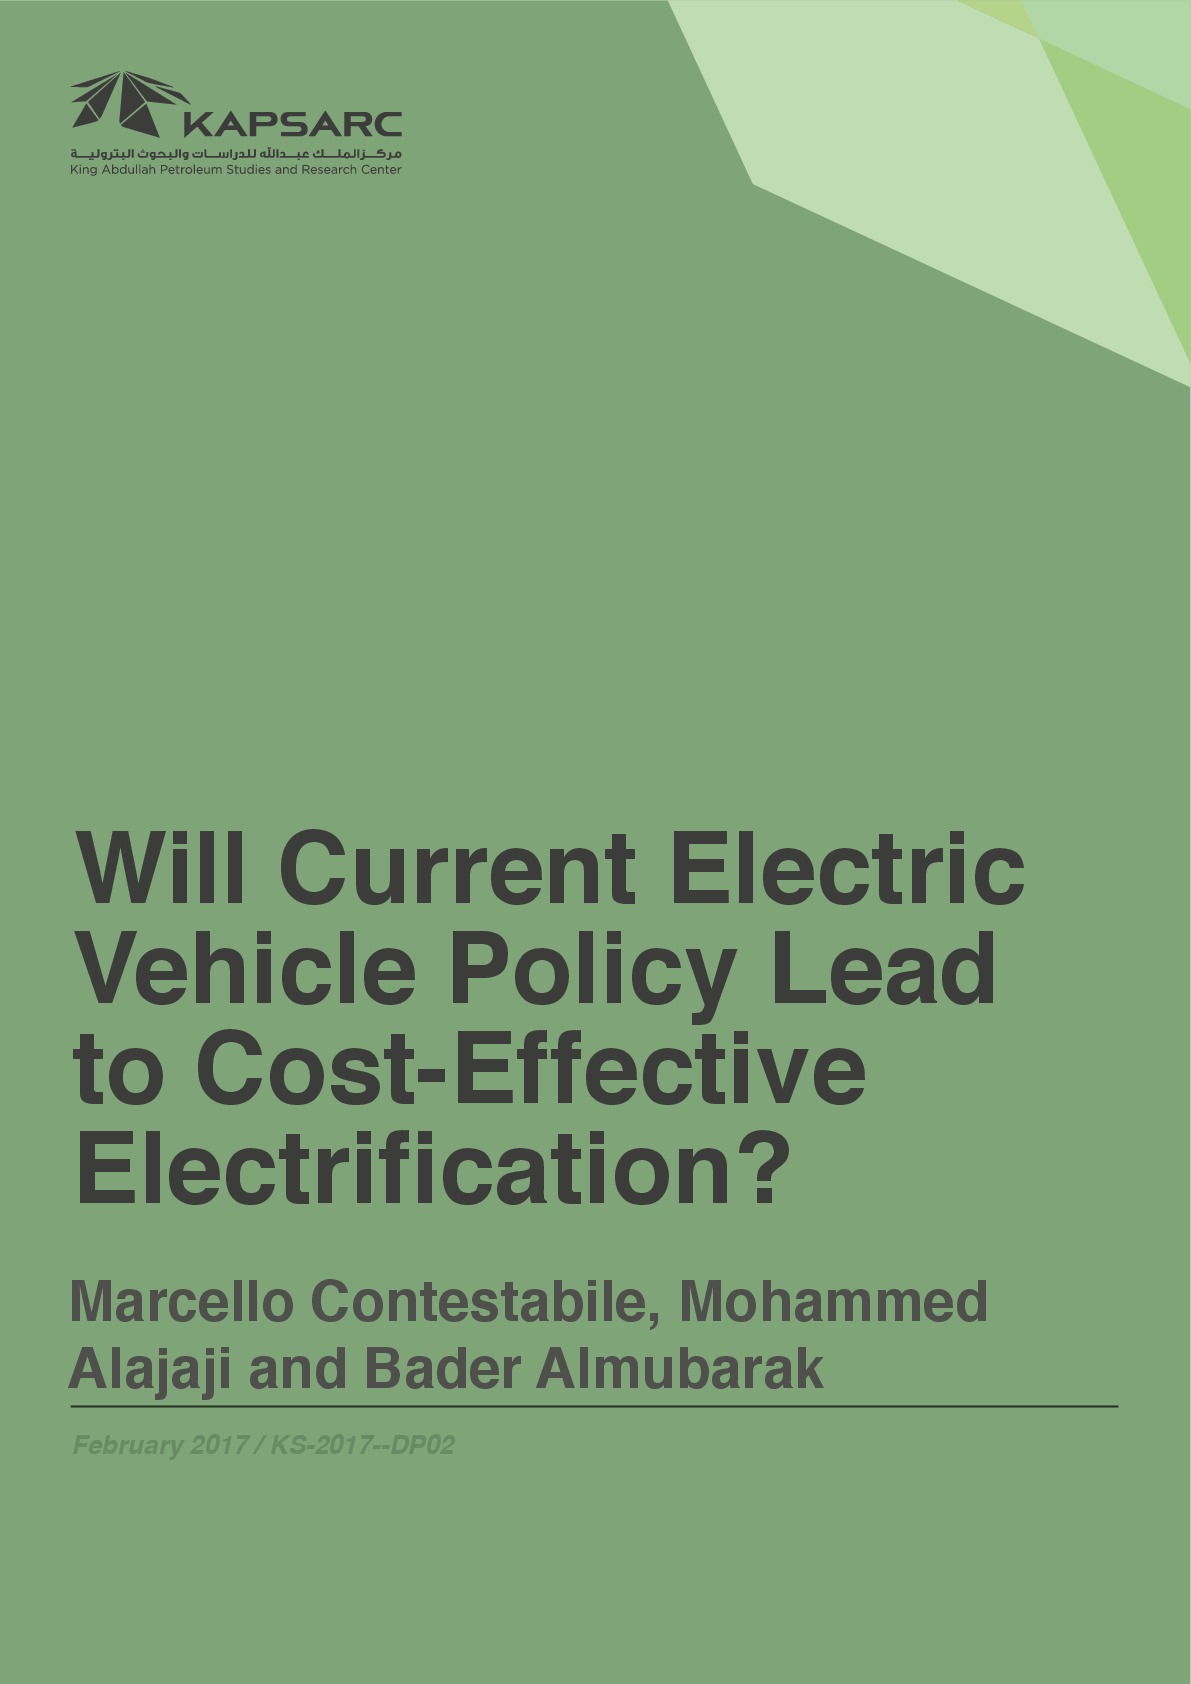 Will Current Electric Vehicle Policy Lead to Cost-Effective Electrification?